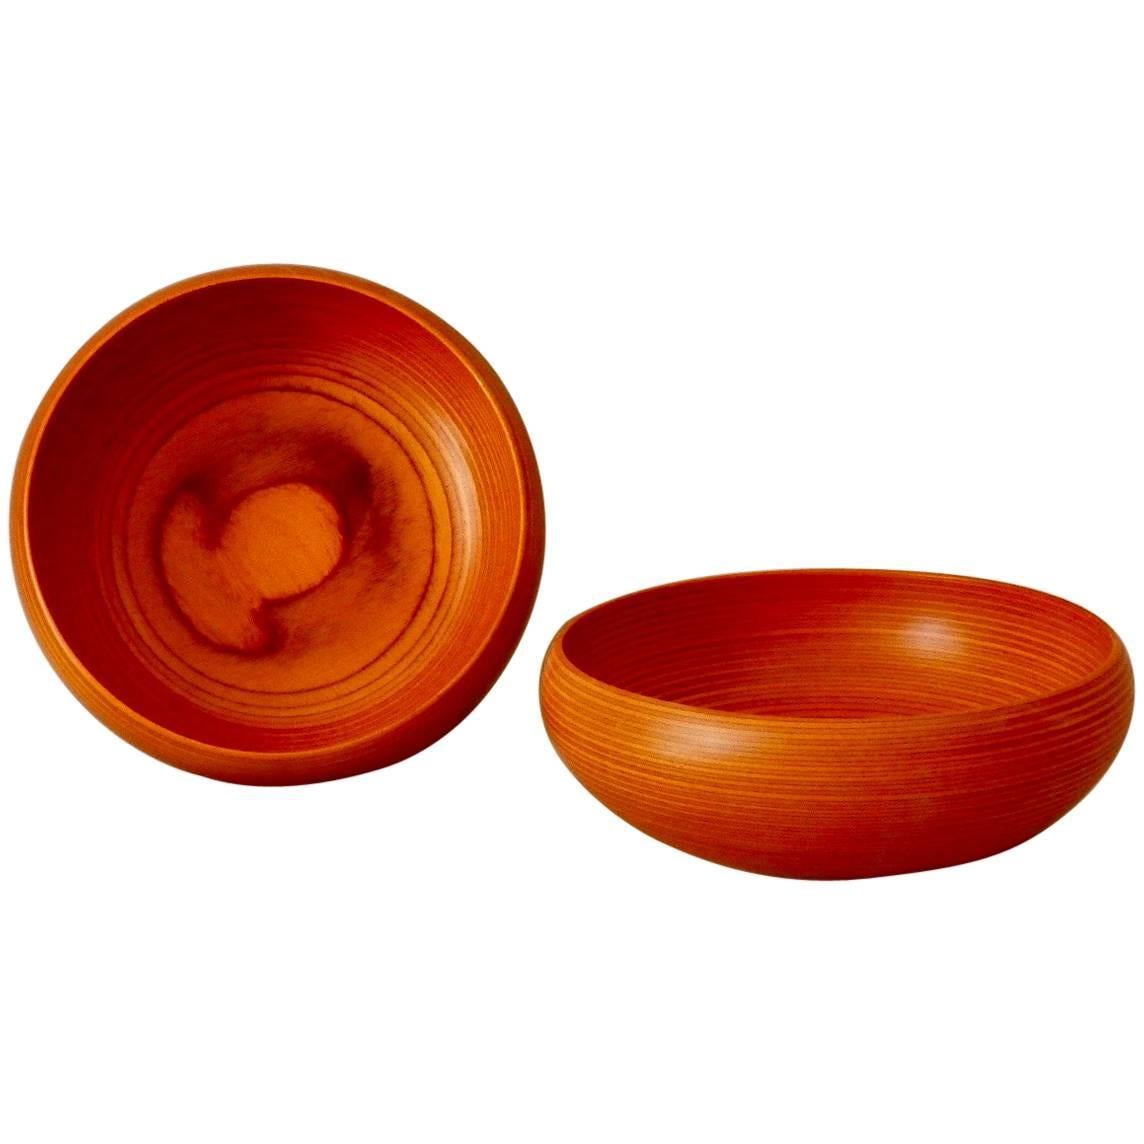 Pair of Paavo Asikainen Turned Laminate Wood Bowl For Sale